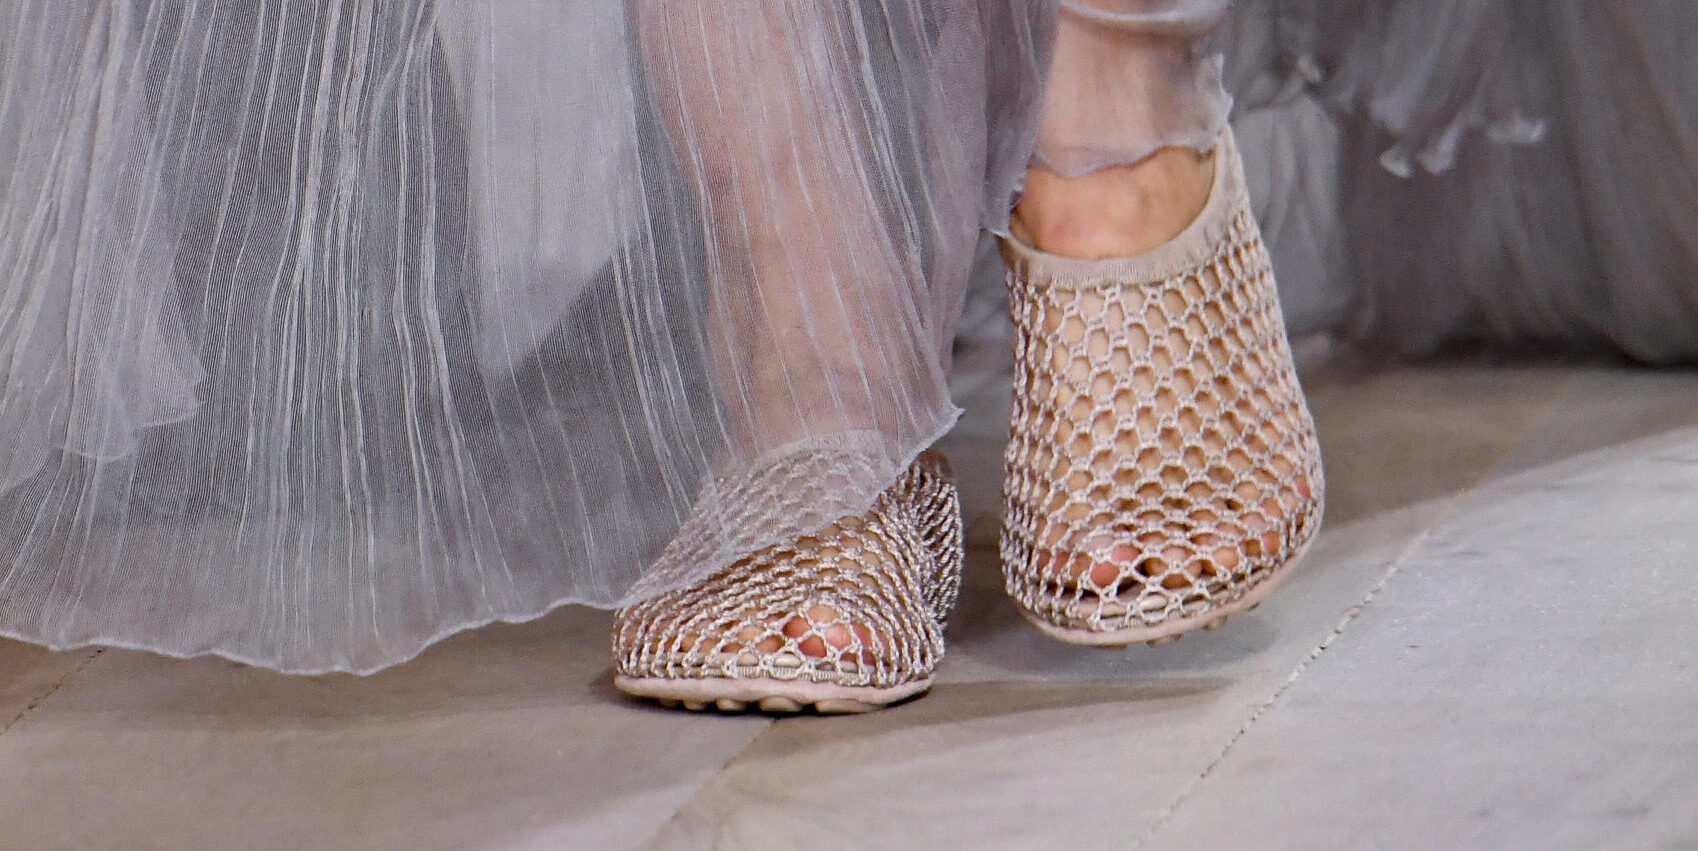 Mesh Flats Are Big This Spring and Here’s Why